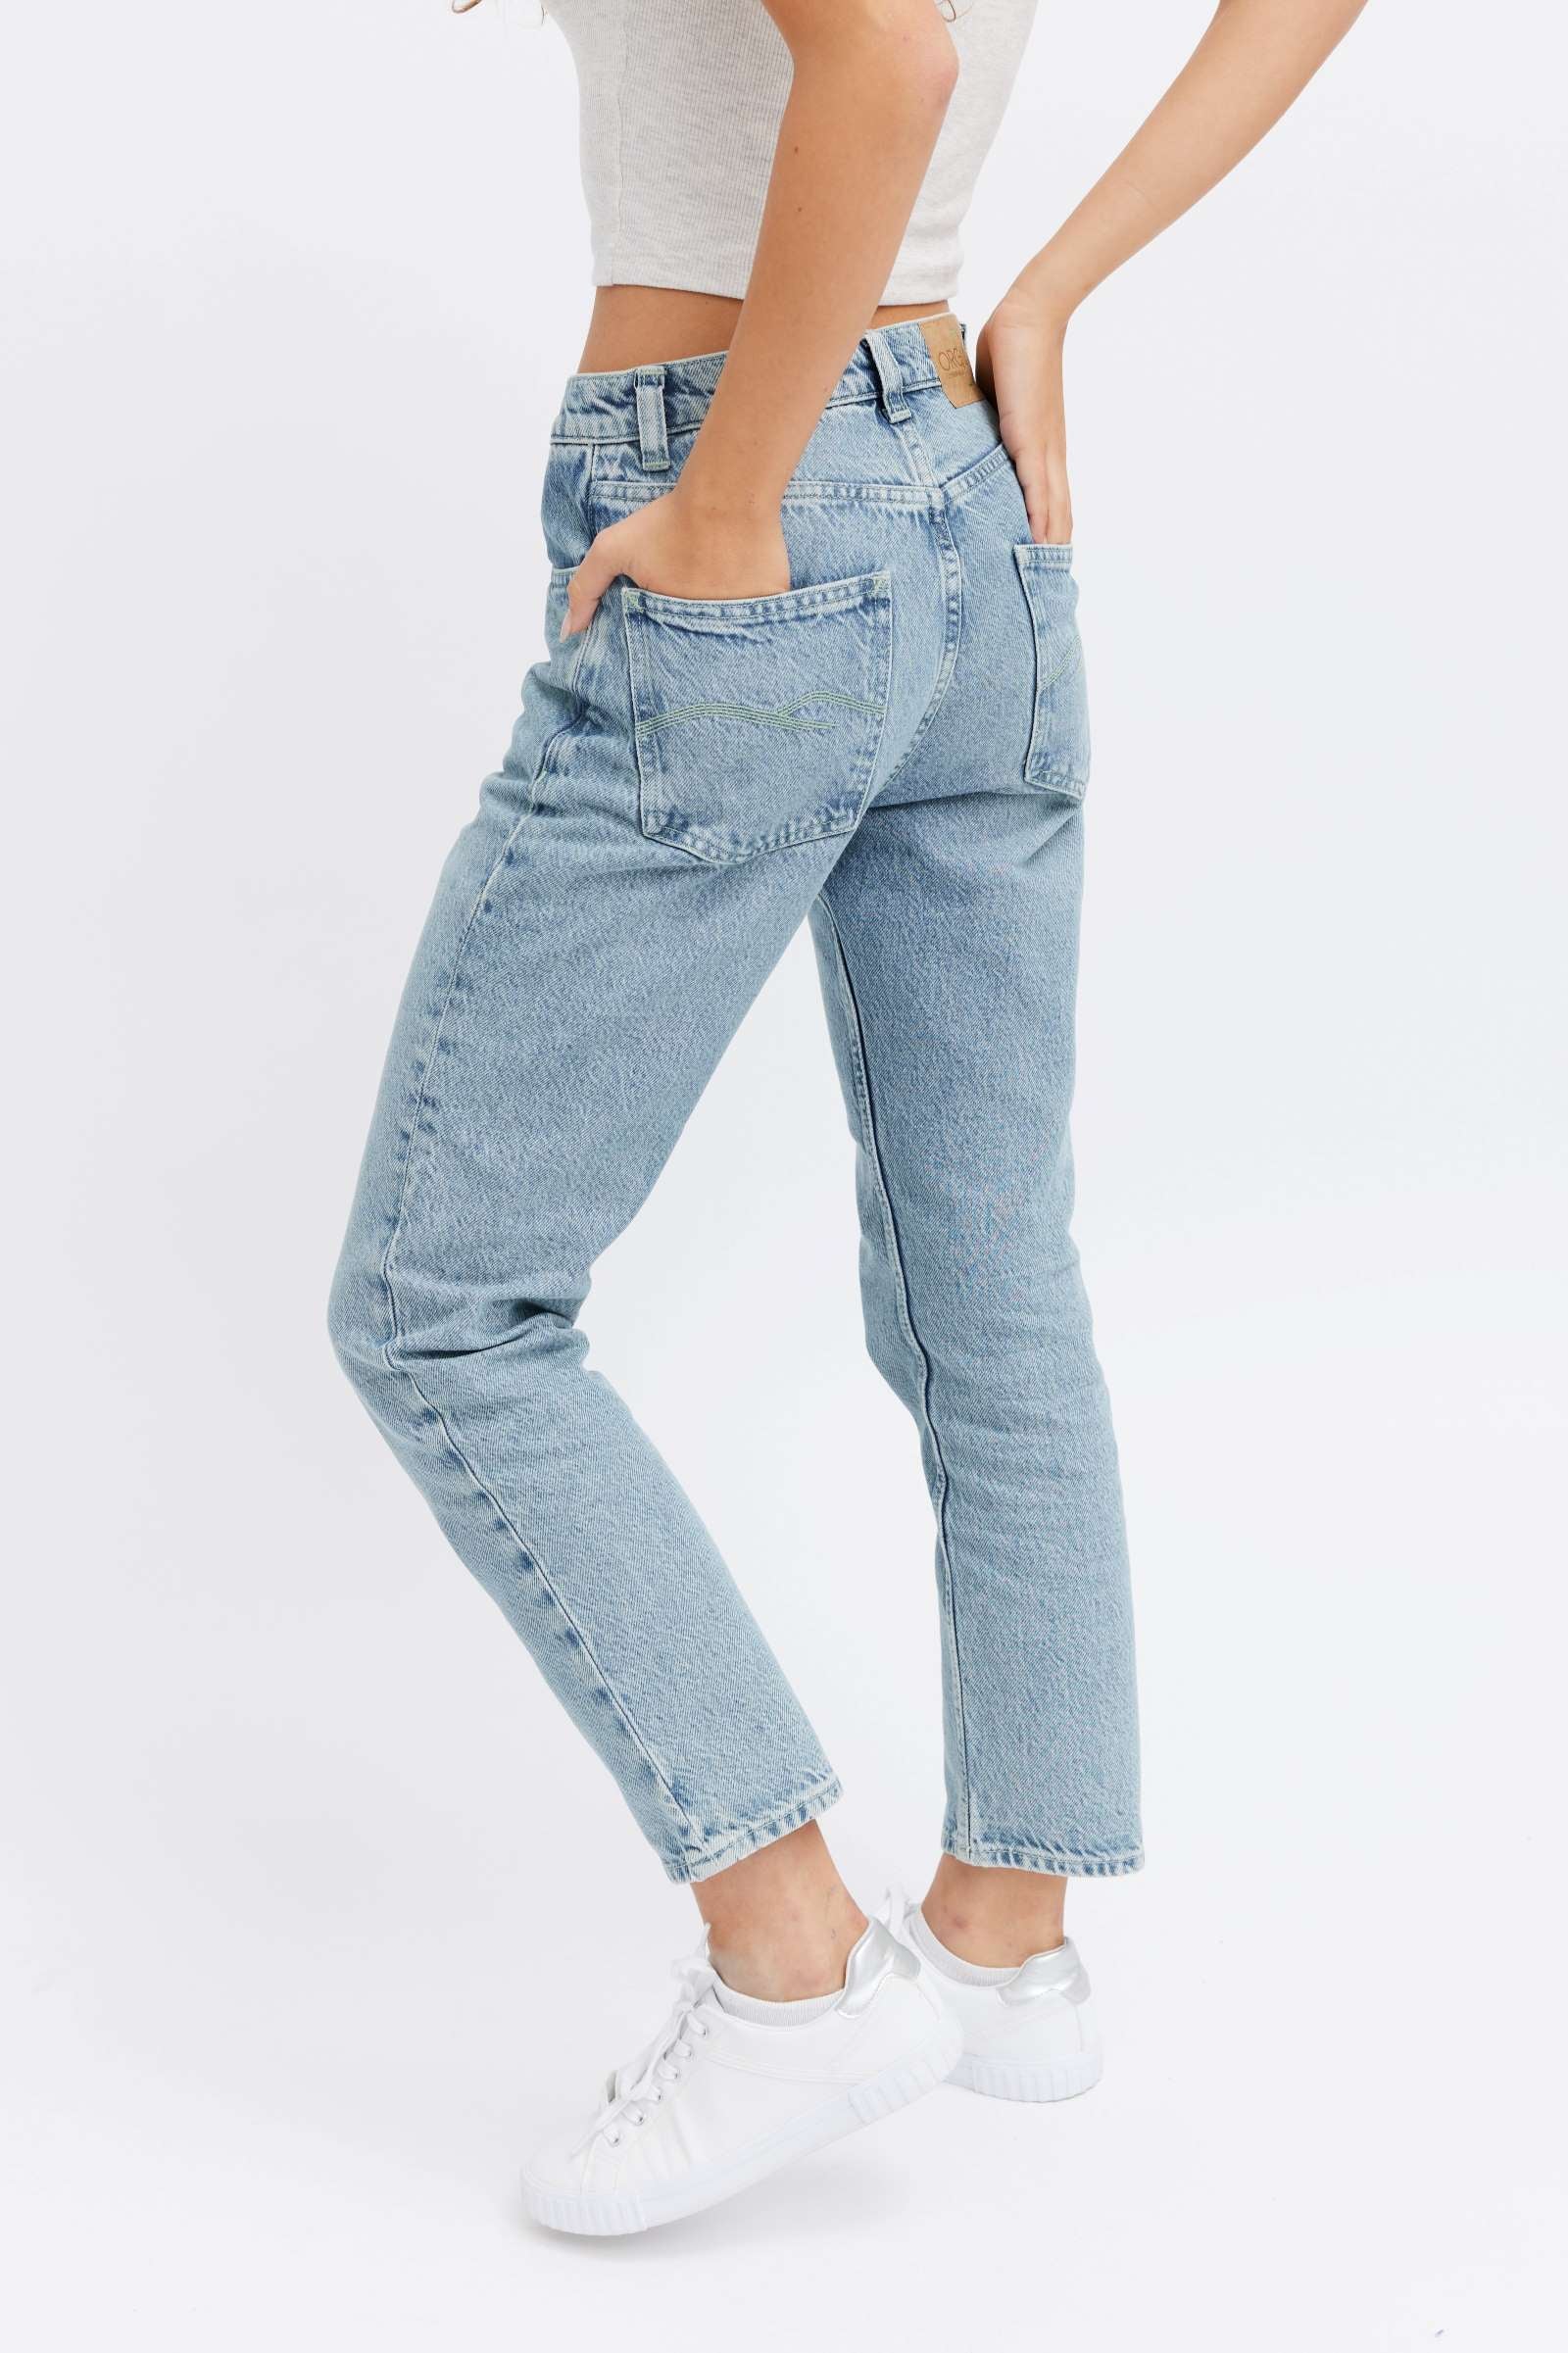 Organic Jeans - Women's  Cropped fit - The best comfortable pants